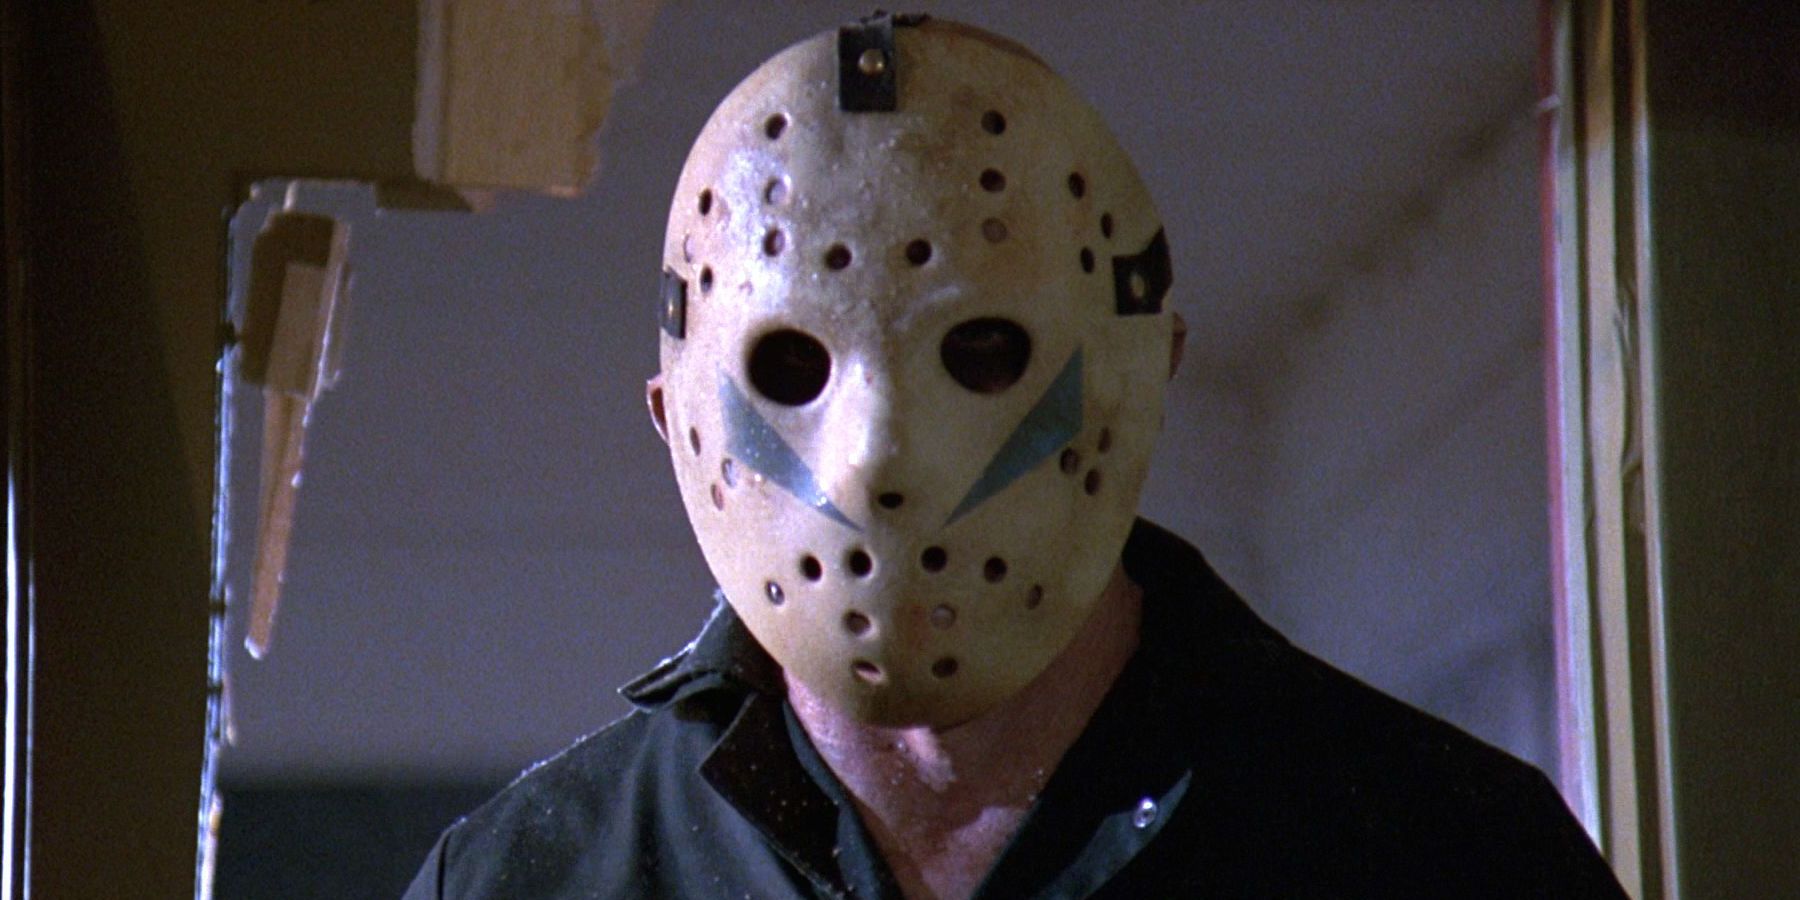 Roy Burns as Jason Voorhees breaking through a door in Friday The 13th Part V The New Beginning